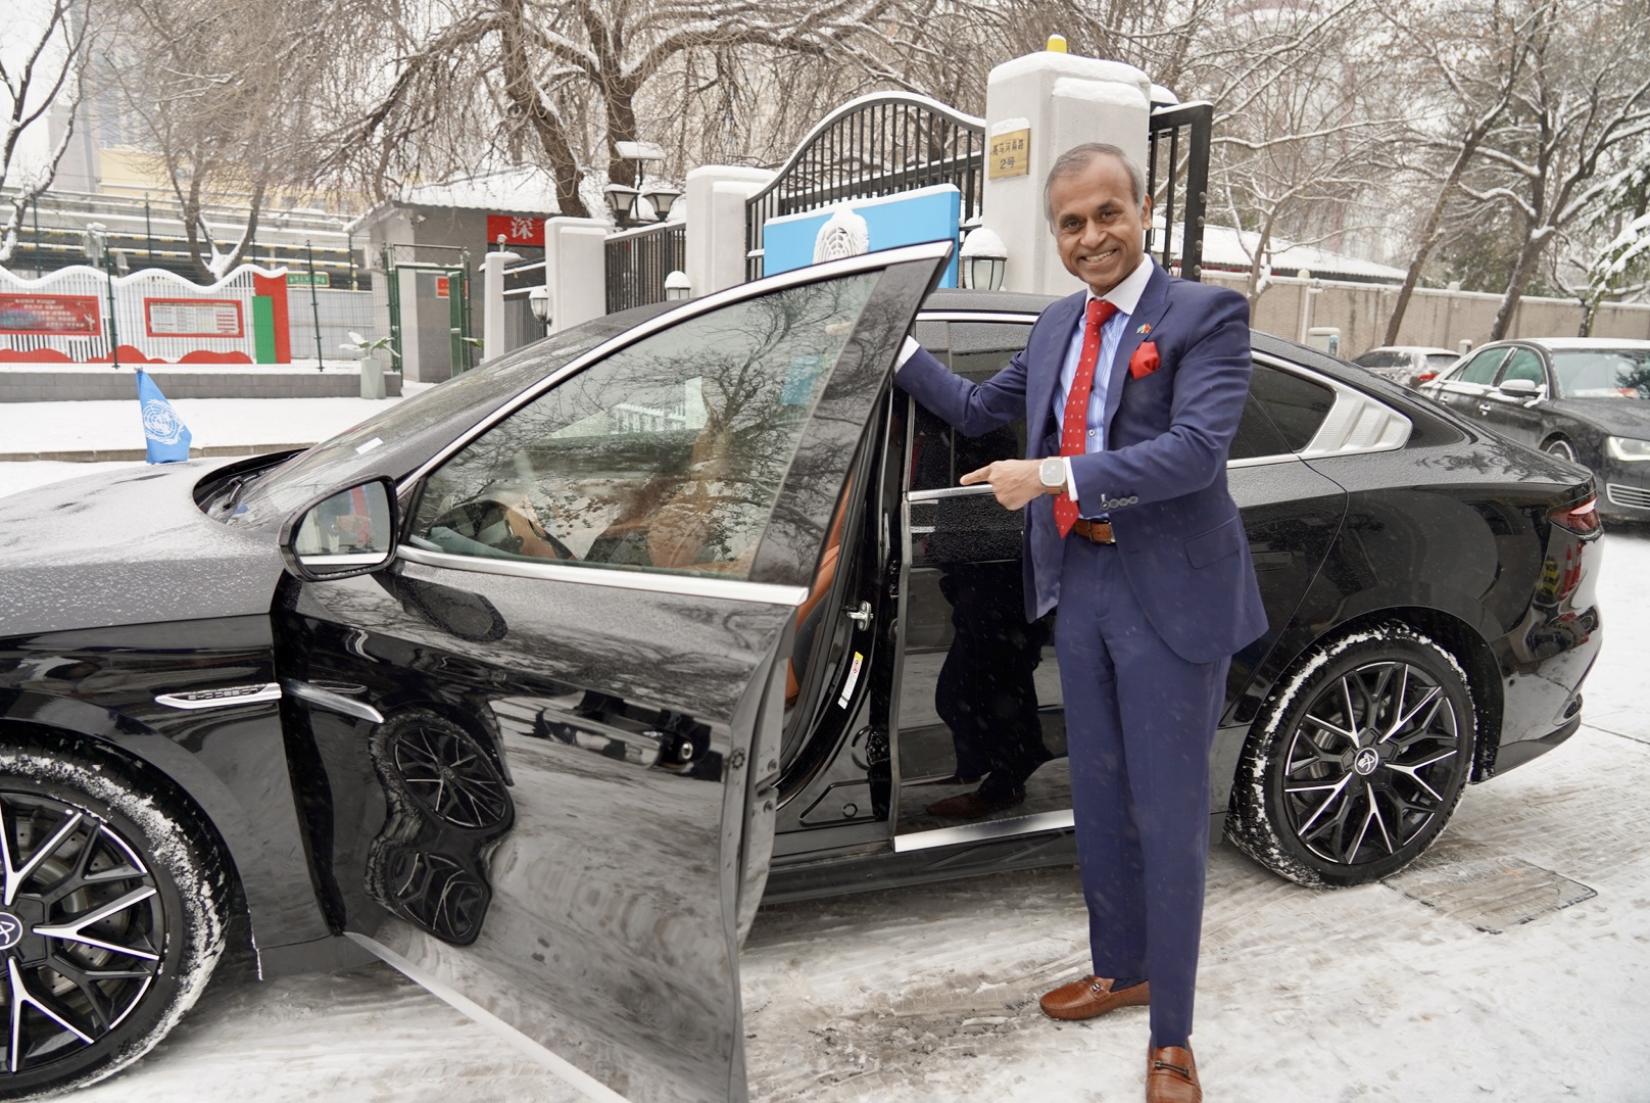 UN Resident Coordinator Siddharth Chatterjee opens door to new official electric vehicle